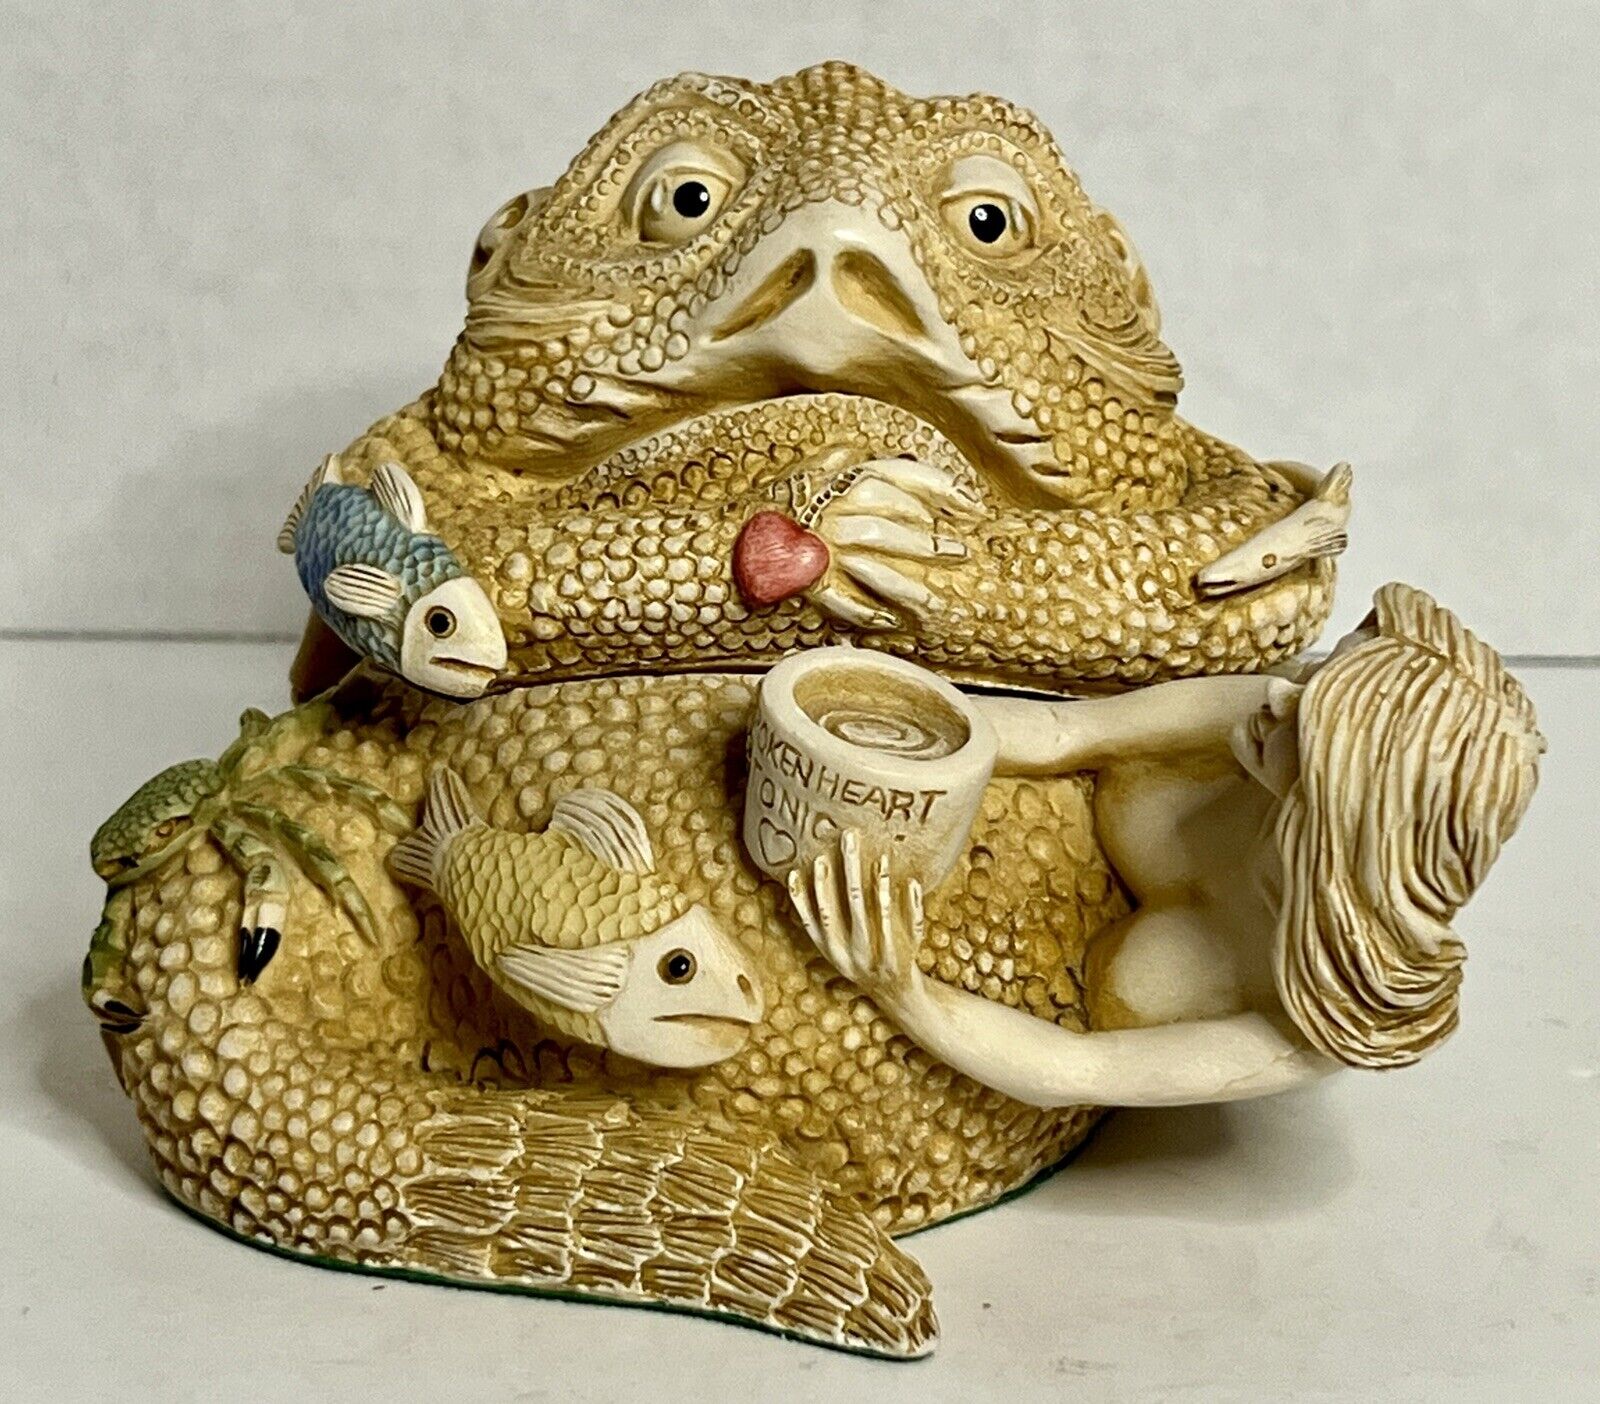 Jabba the Hutt-Like Trinket Box from S.I.A.B. England by Michael R. Tandy - Rare